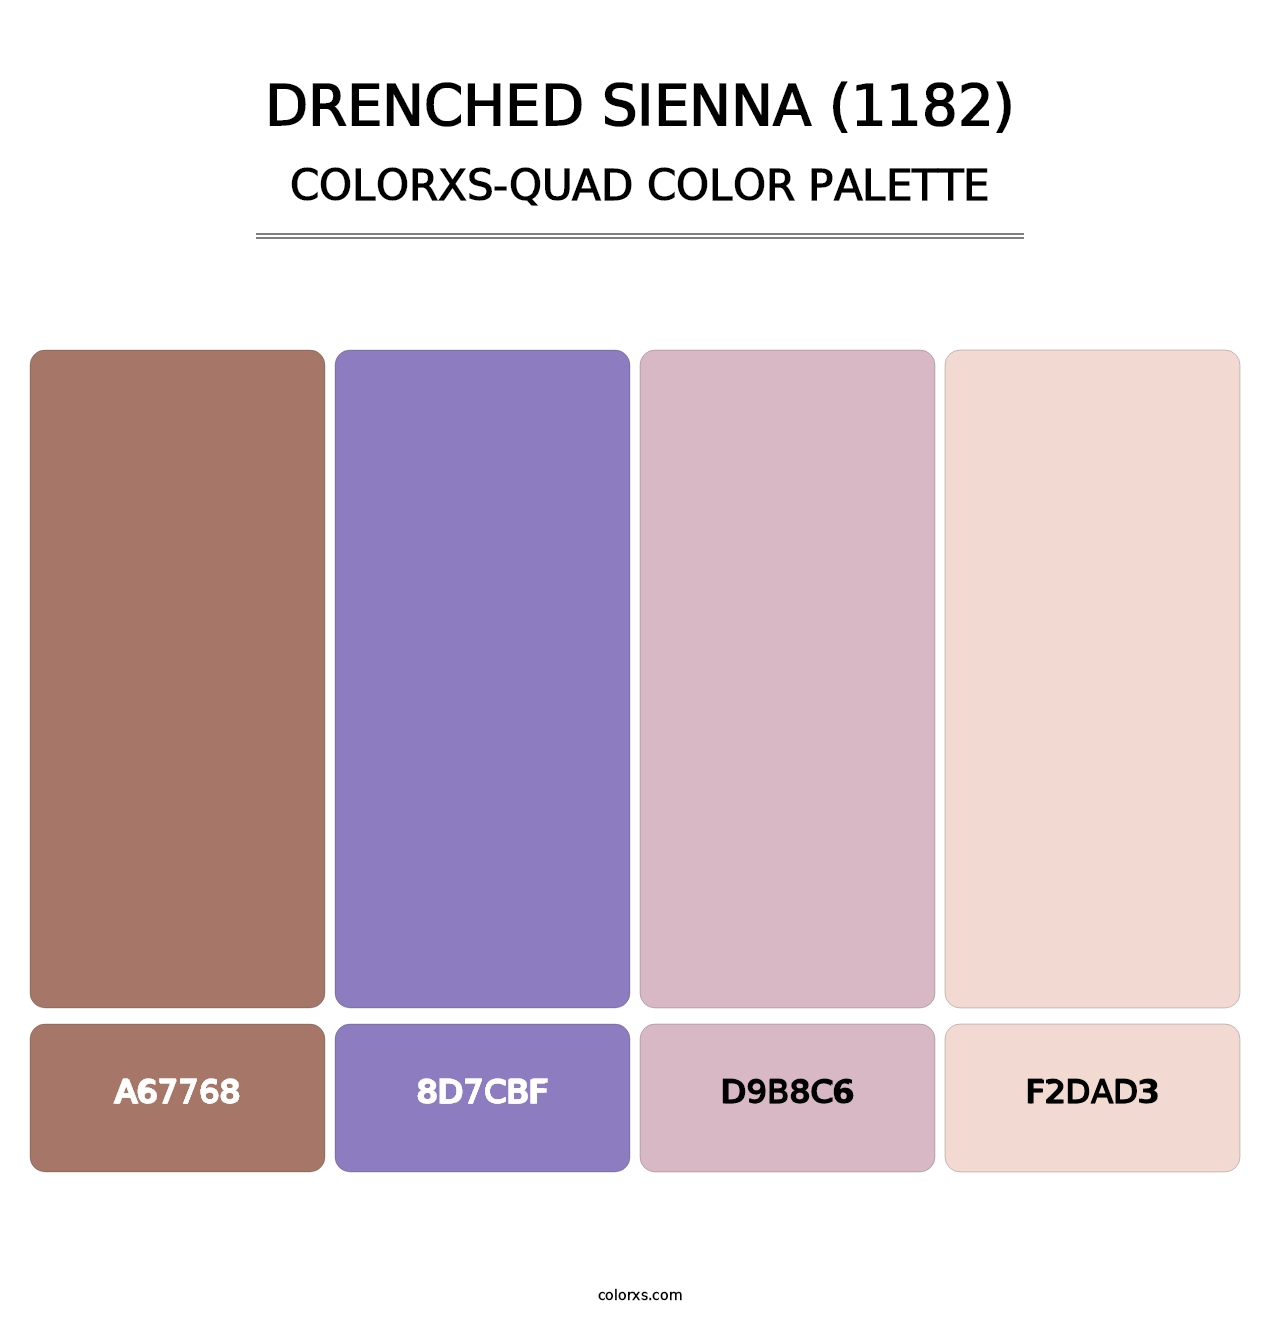 Drenched Sienna (1182) - Colorxs Quad Palette